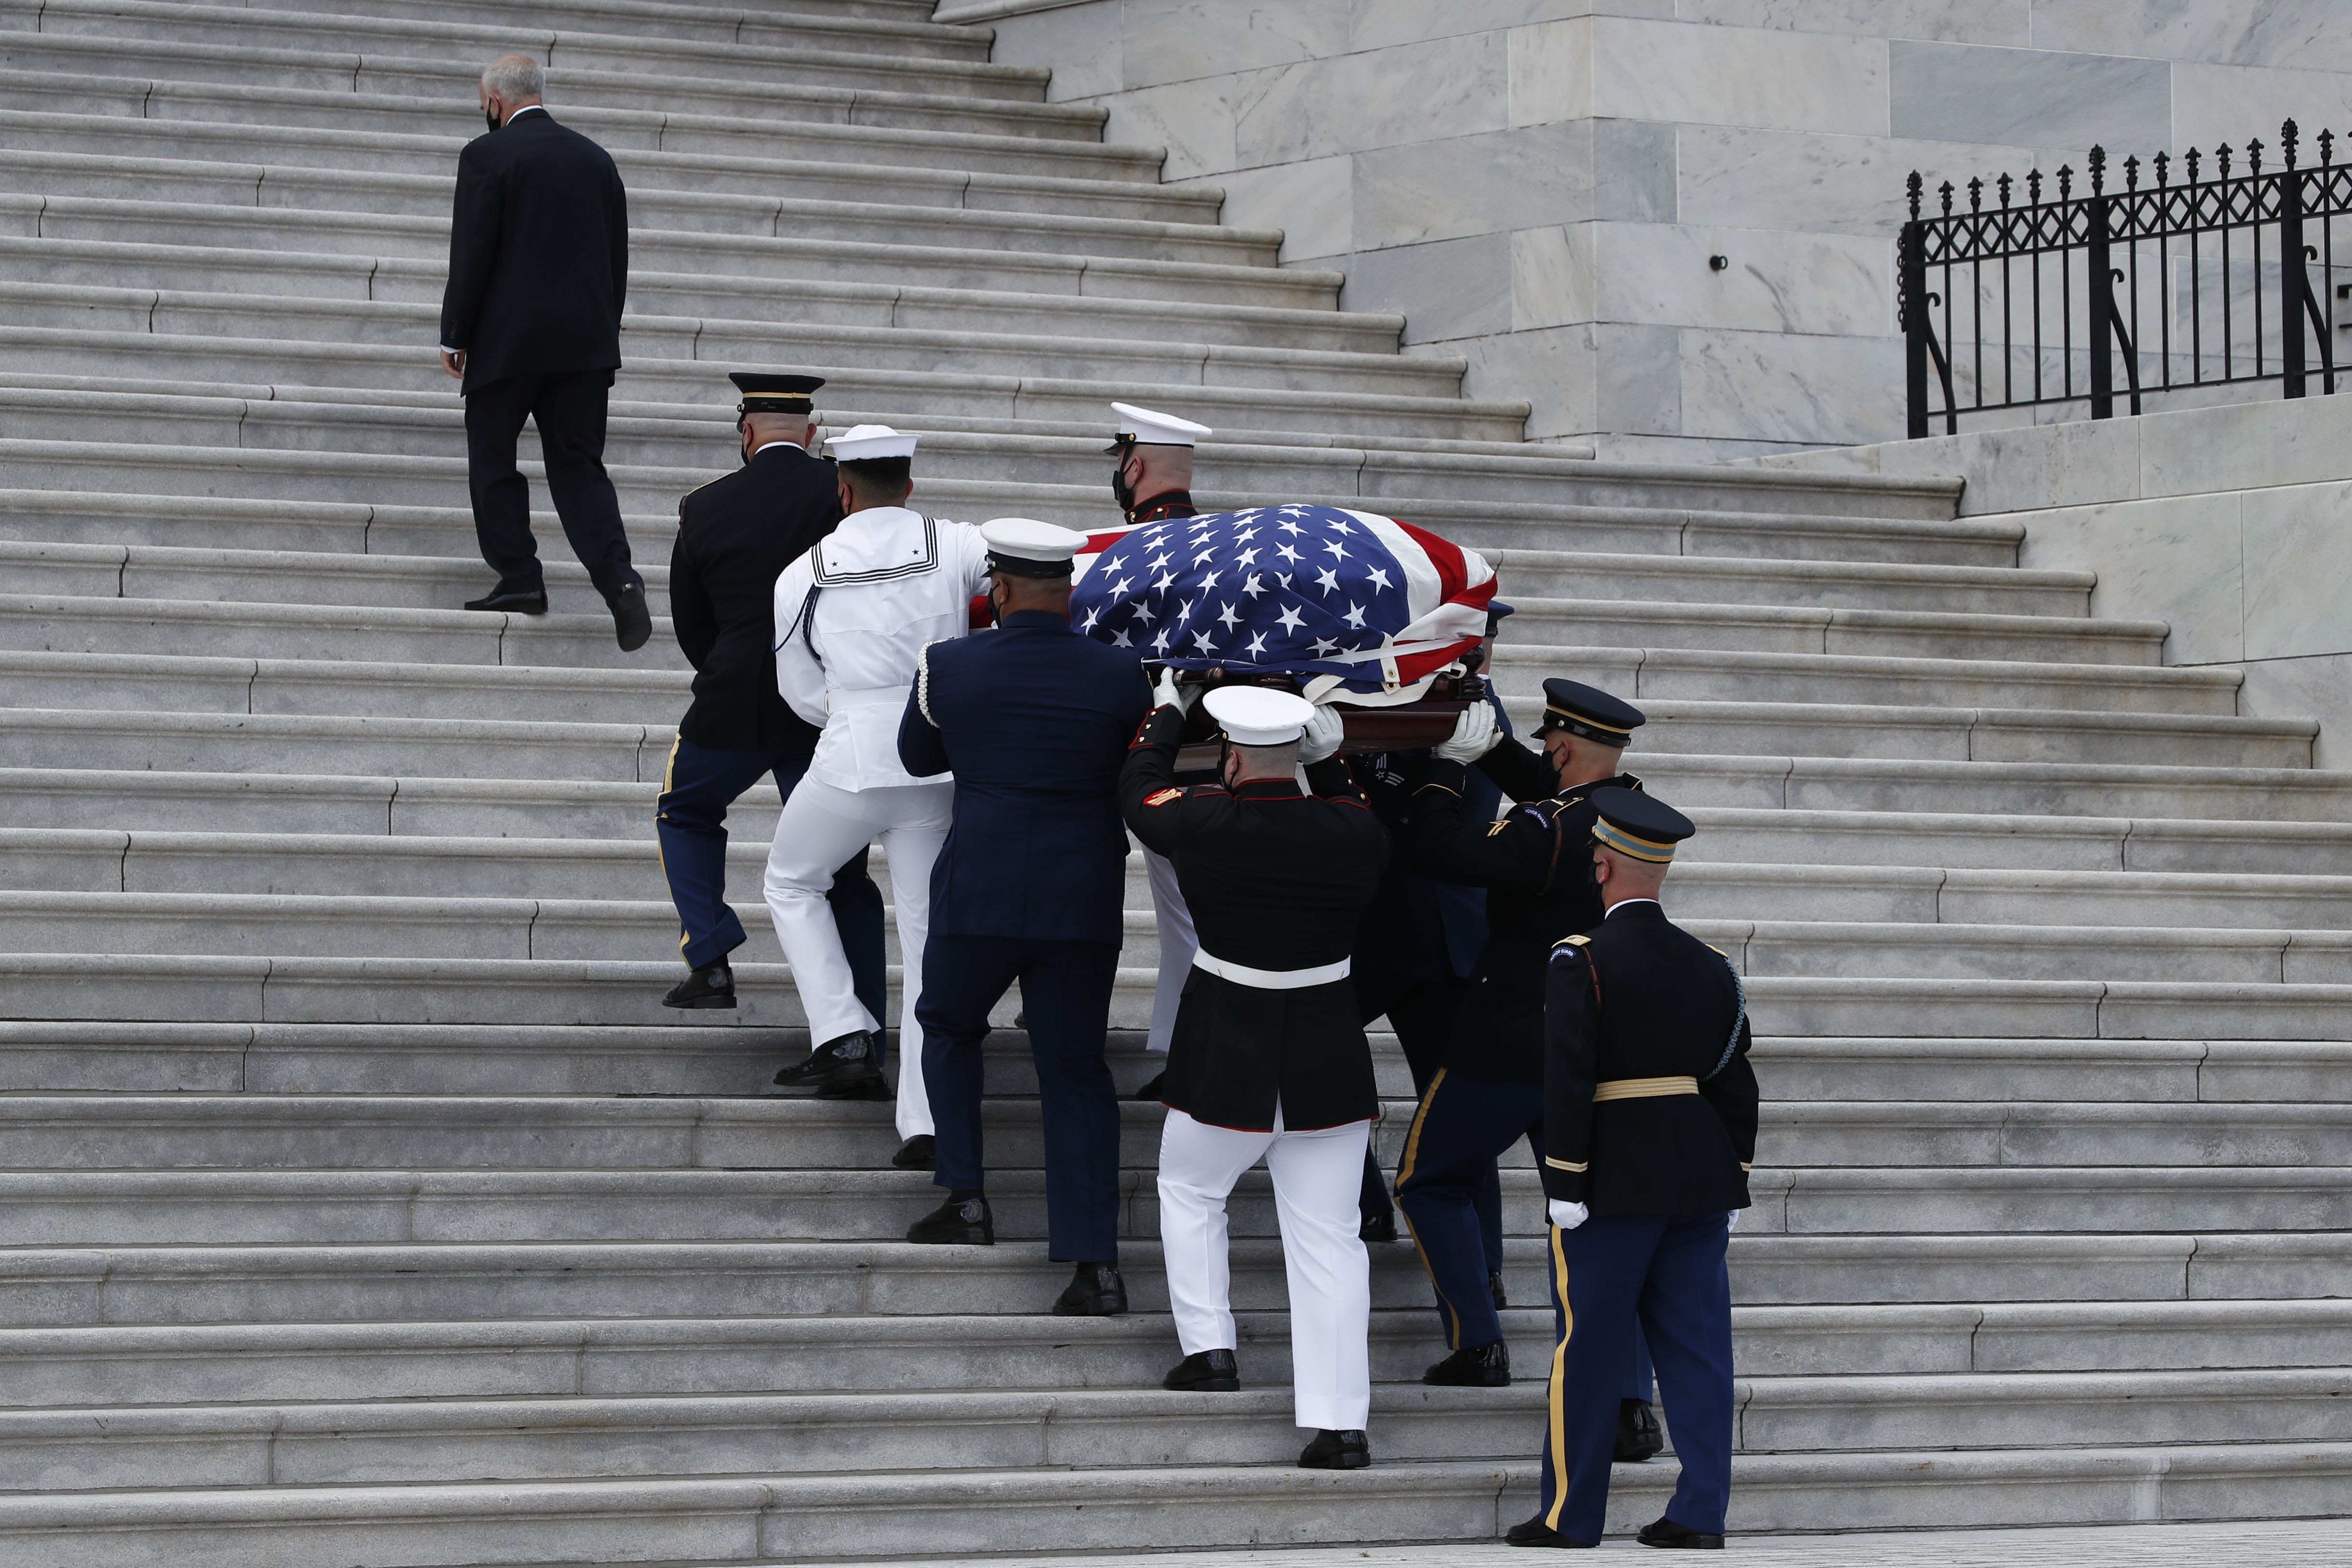 The flag-draped casket of Rep. John Lewis, D-Ga., is carried by a joint services military honor guard to lie in state